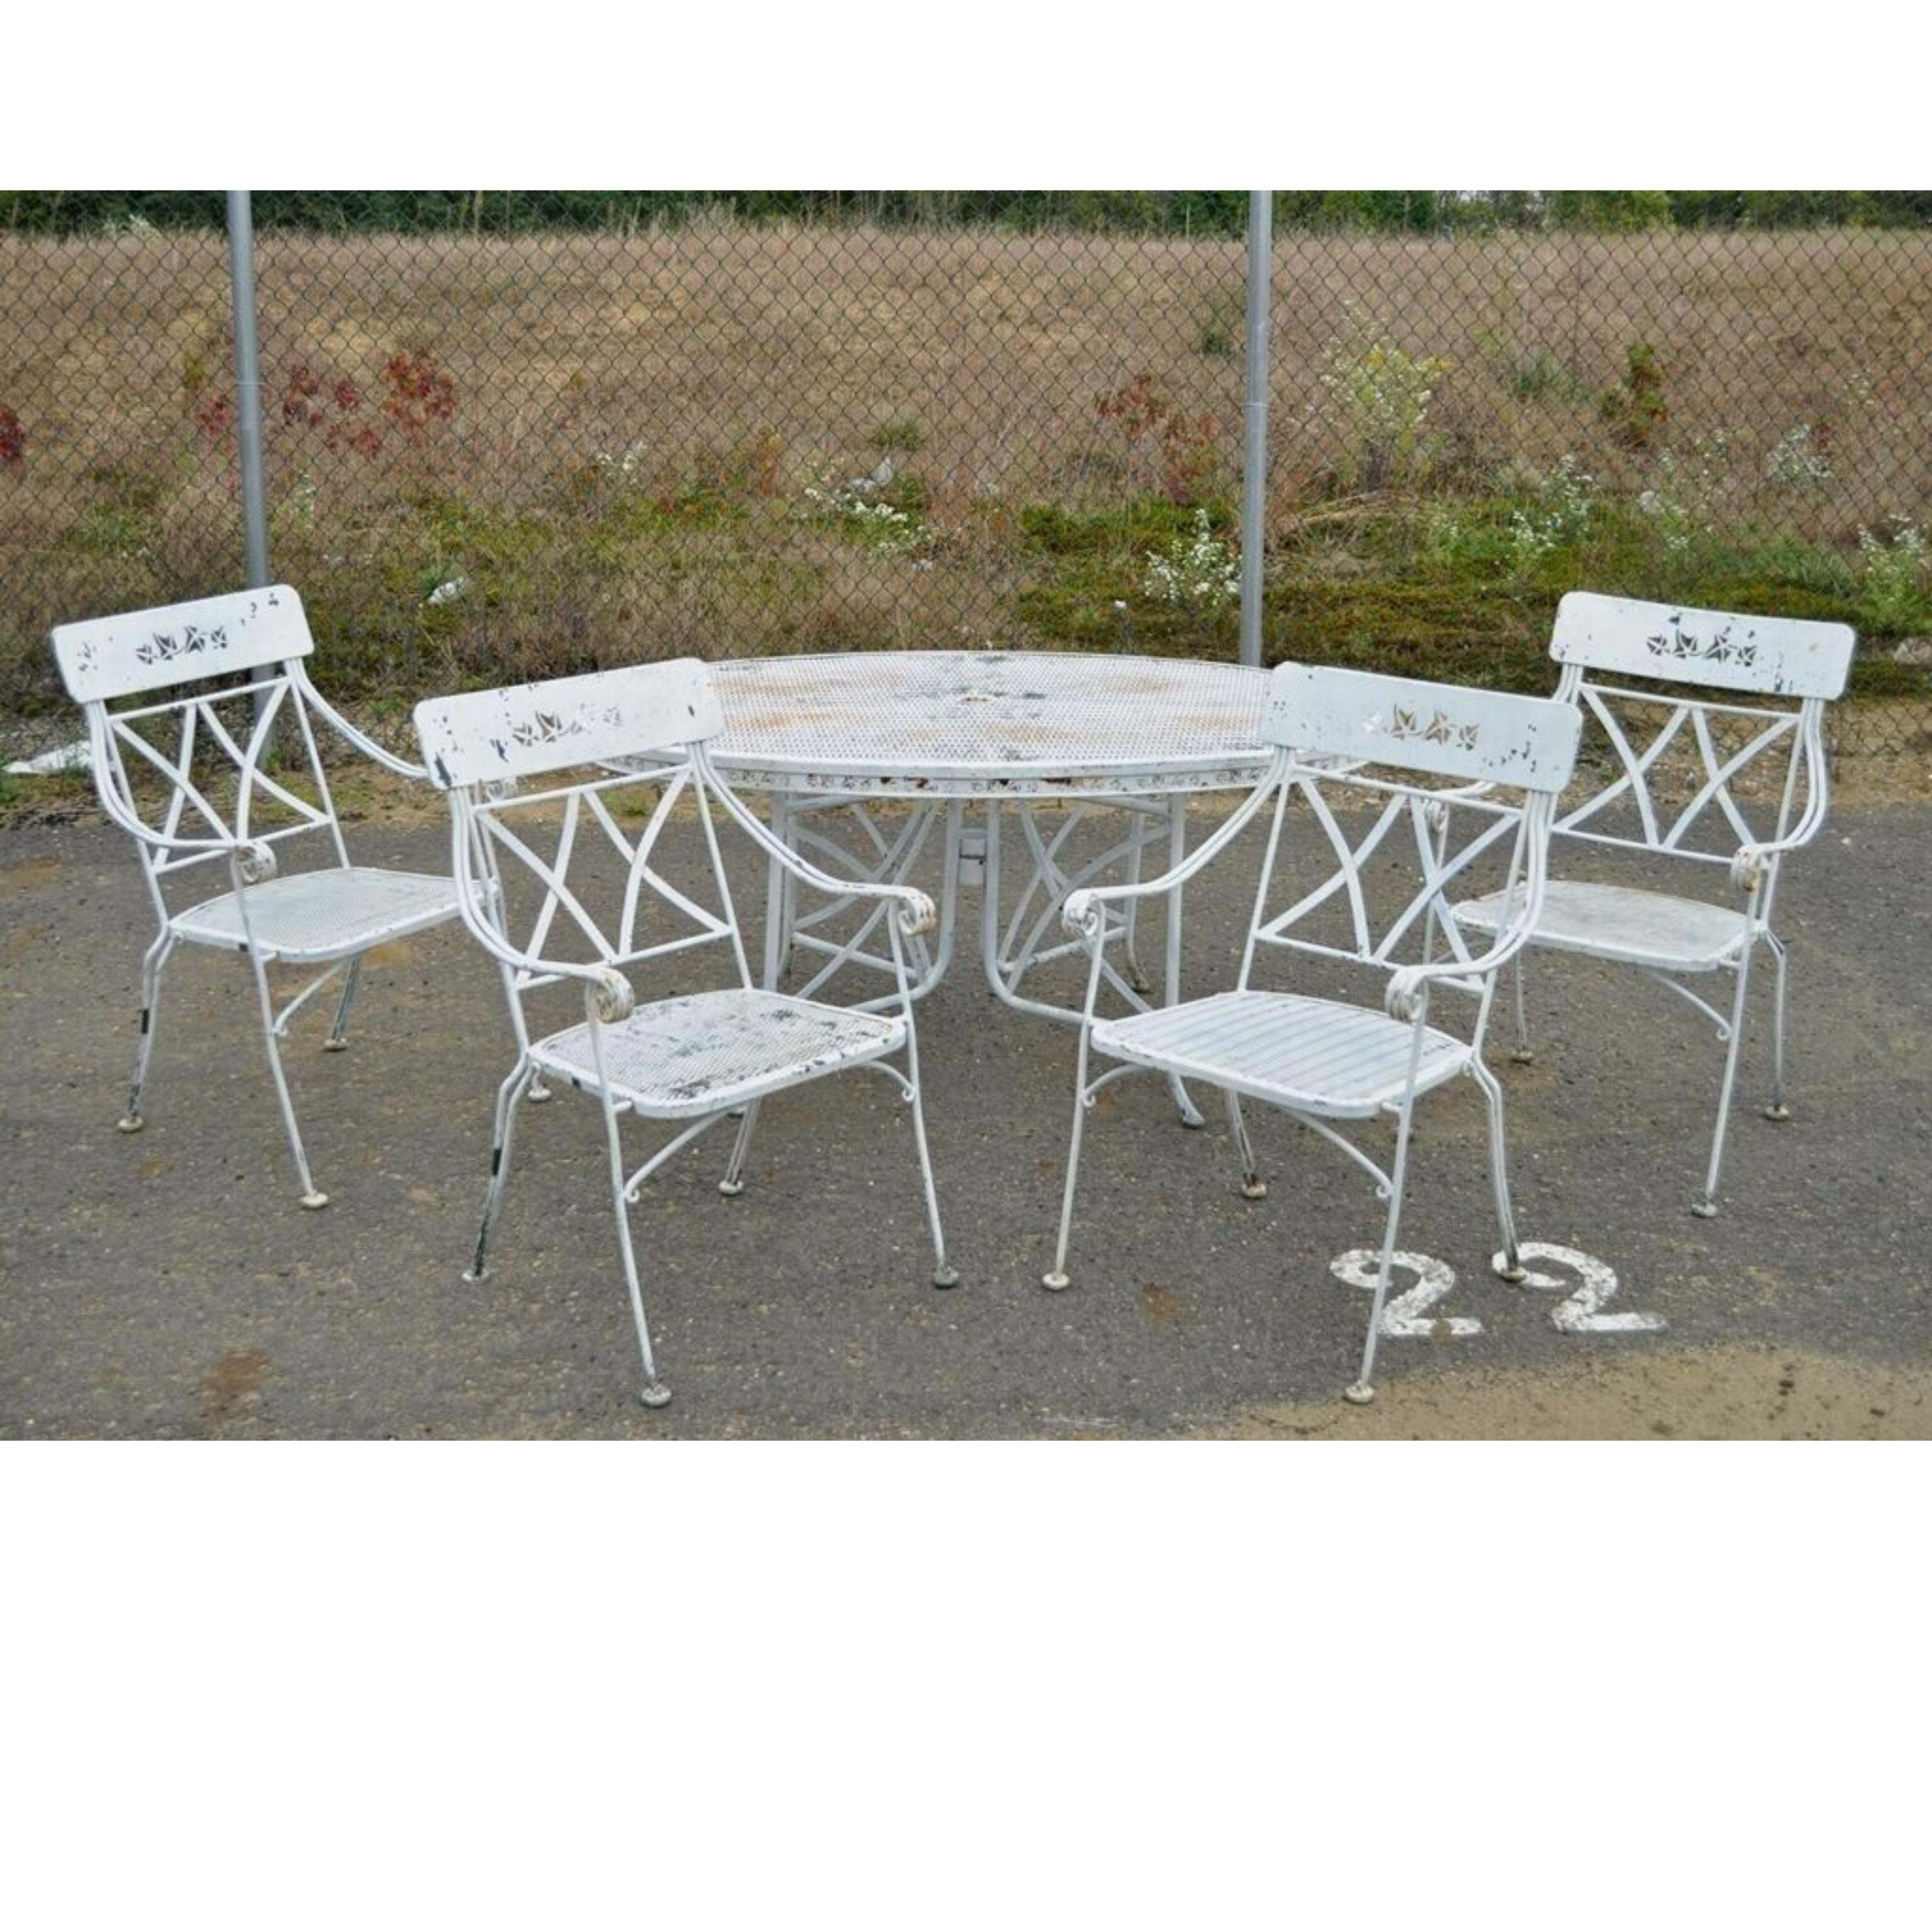 Vintage Wrought Iron Salterini Style Garden Patio Dining Set - 5 Pc Set. Item features 4 curule armchairs with cut-out leaf pattern and oval table with umbrella hole. Circa Mid 20th Century.
Measurements: 
Table: 28